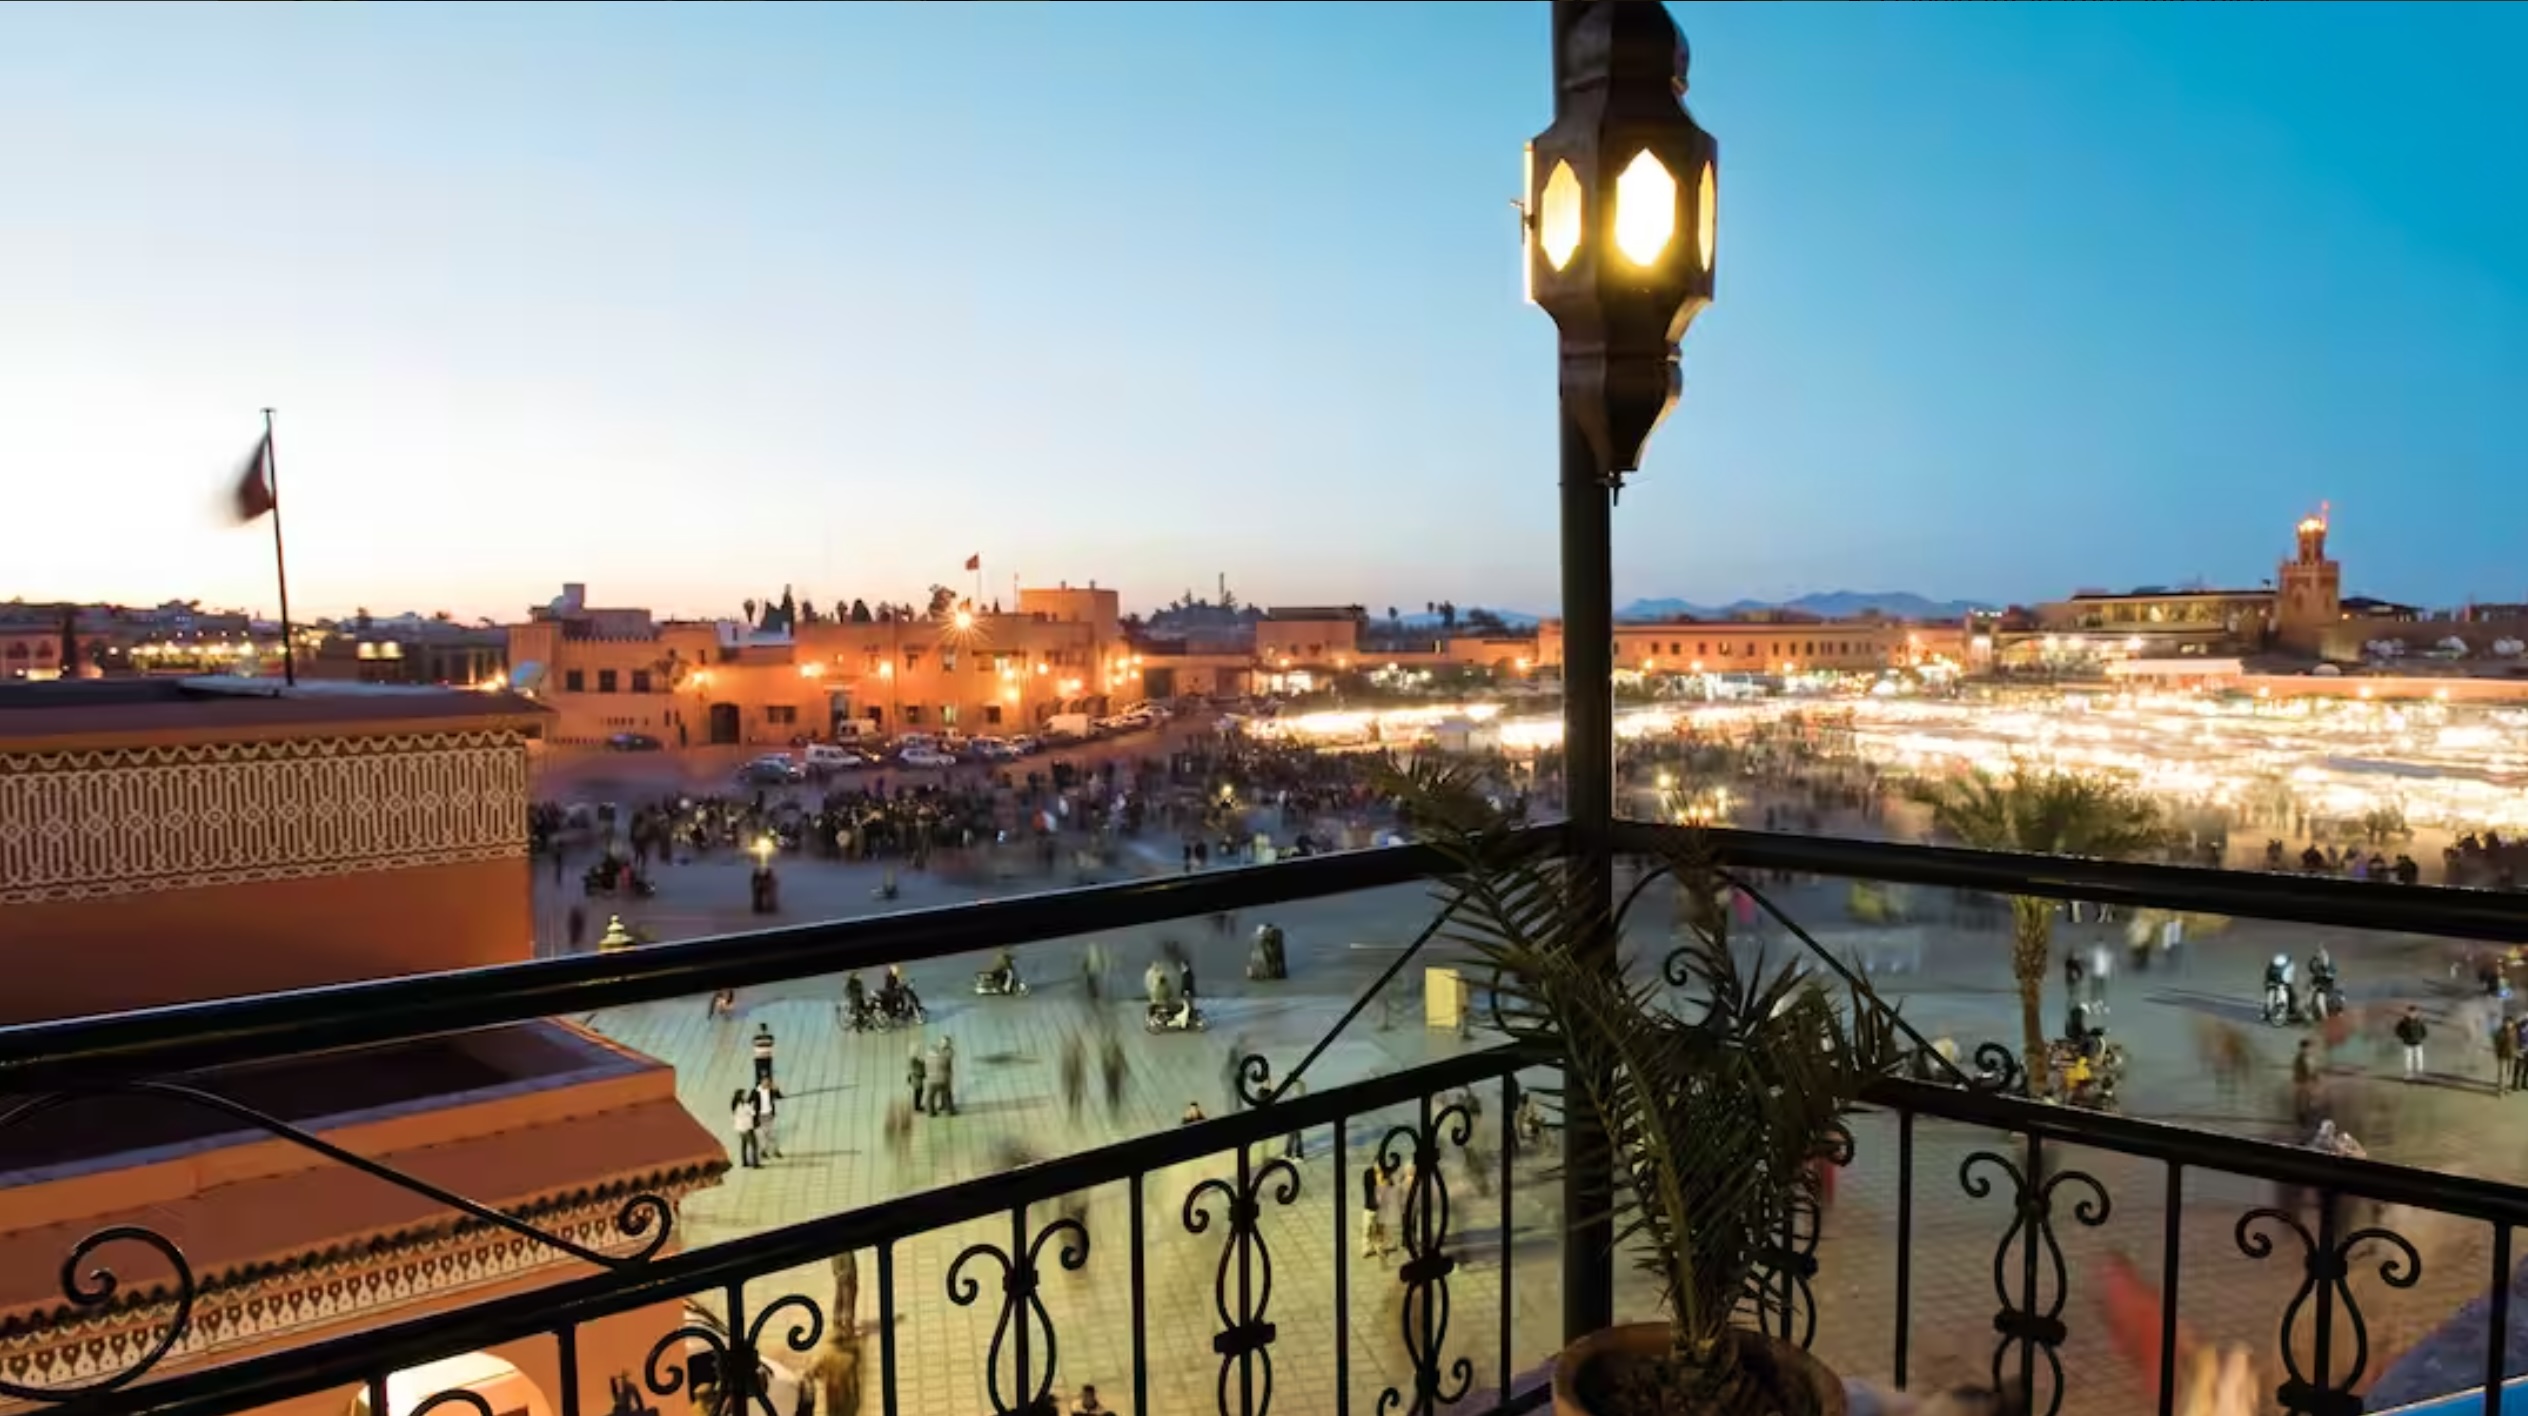 Visit the souks in Marrakech and pick up a bargain. Evening view